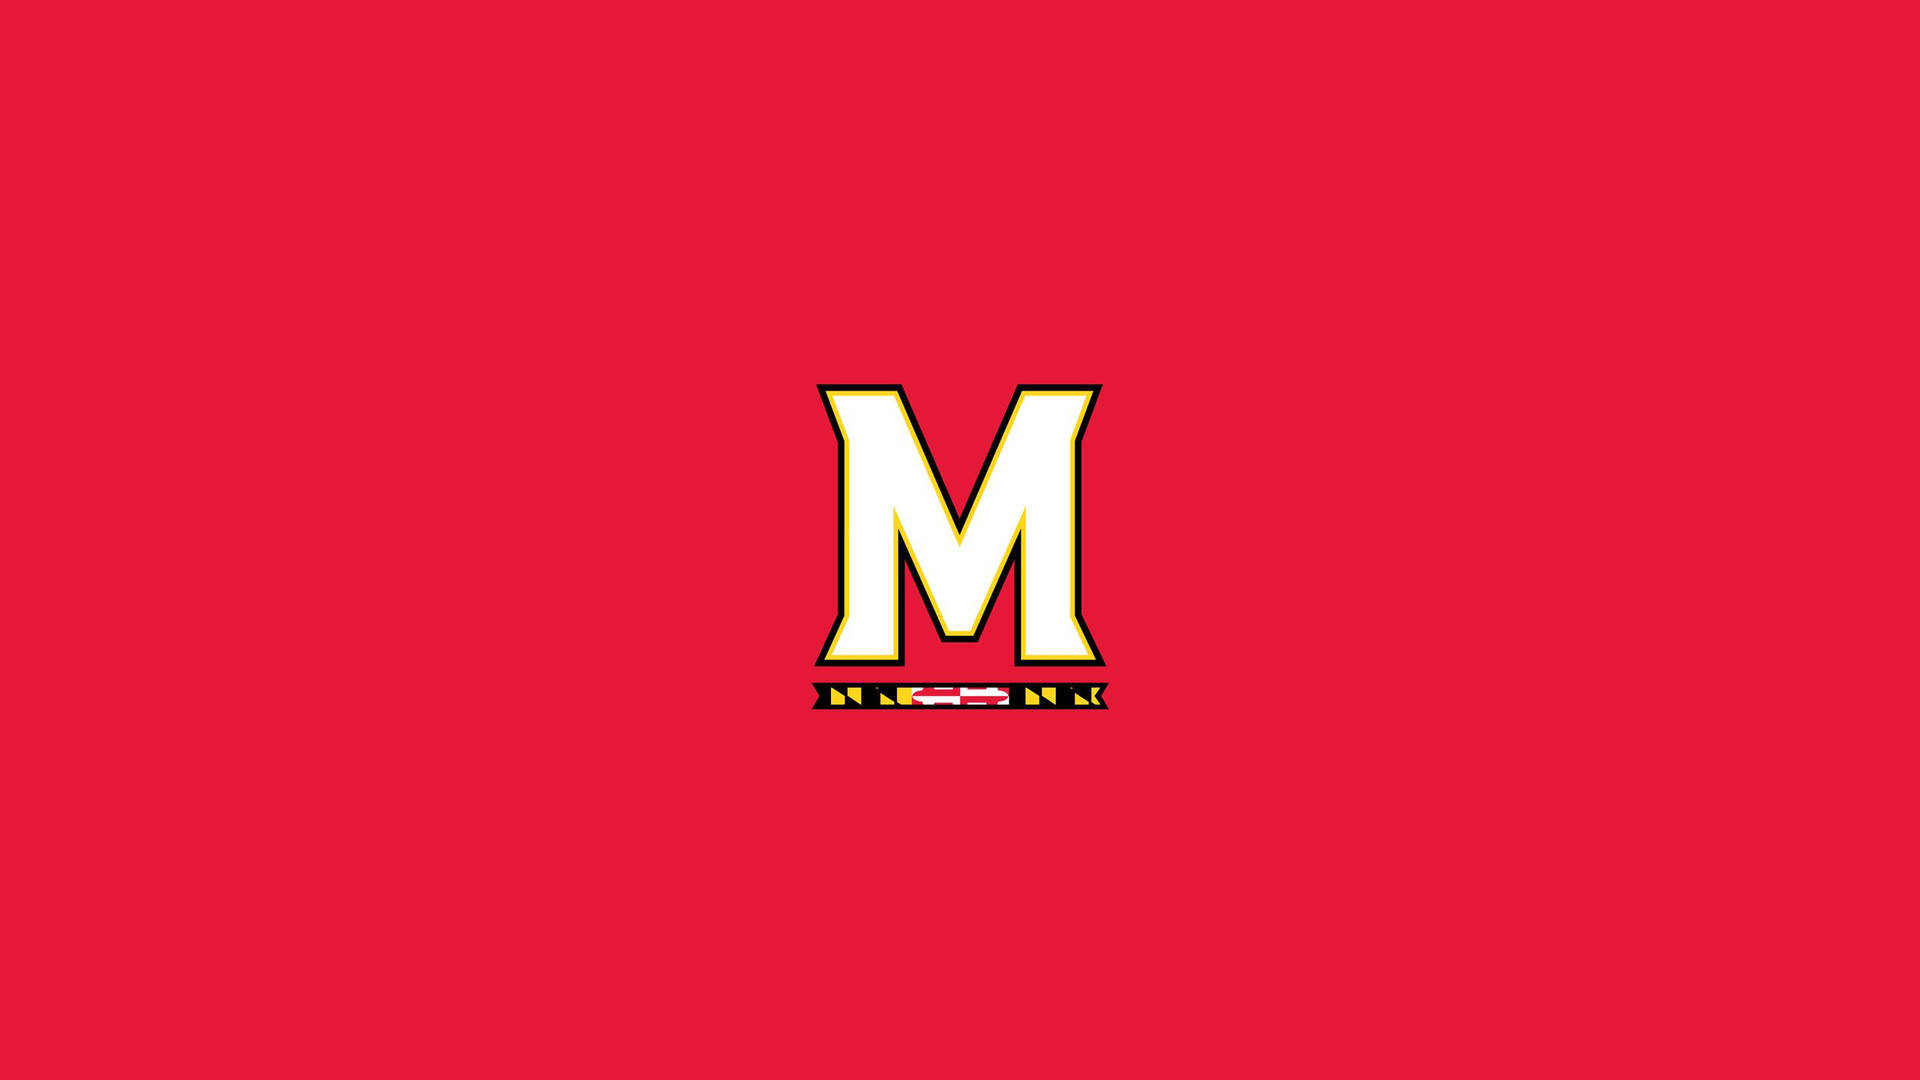 University Of Maryland White On Red Wallpaper